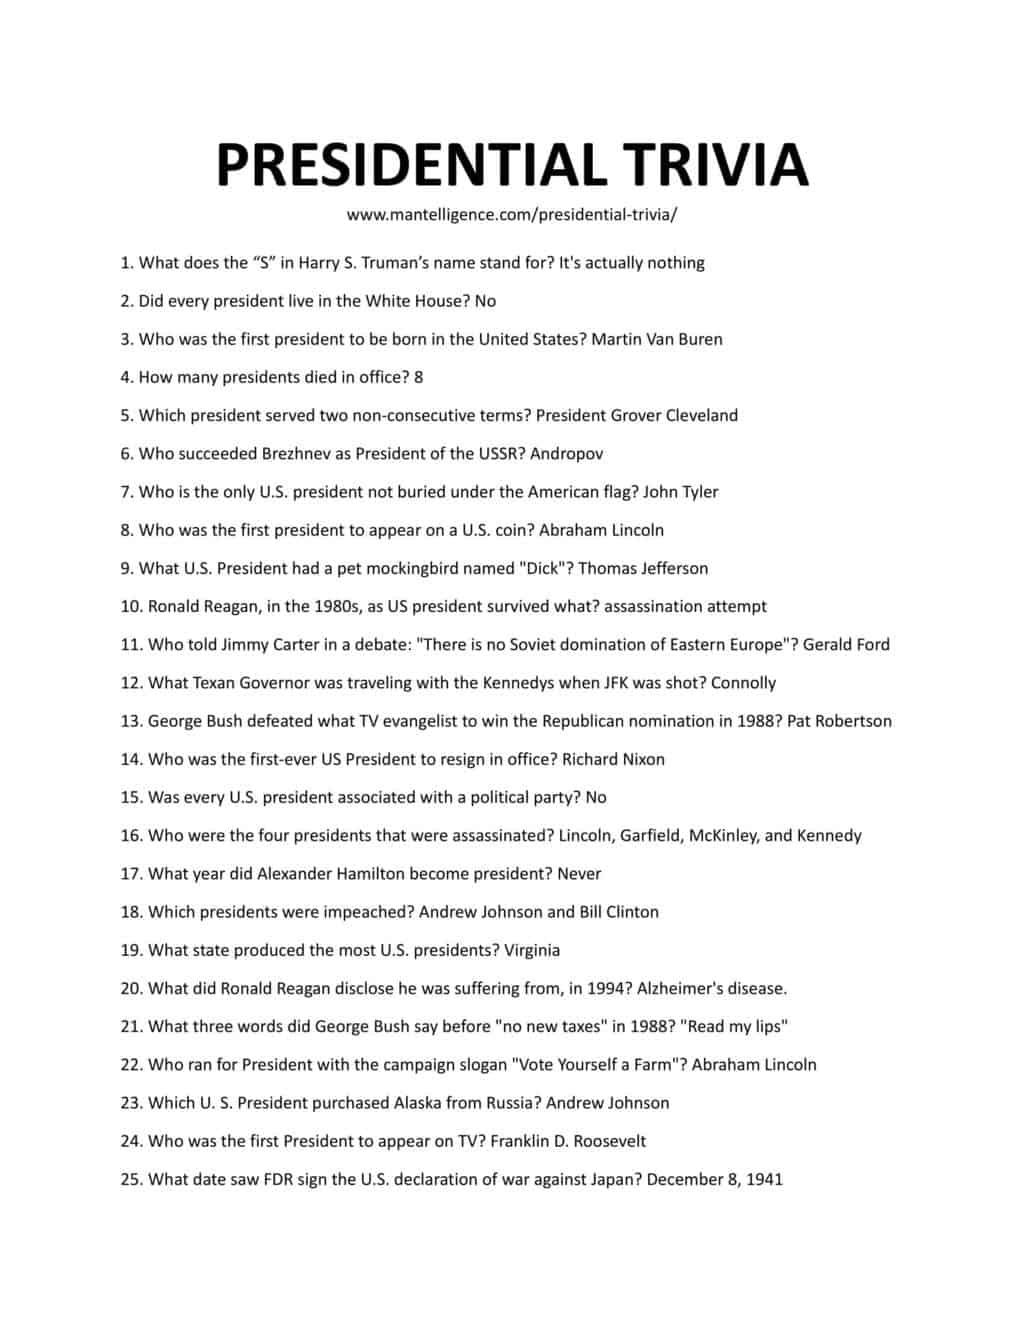 presidential-trivia-questions-and-answers-printable